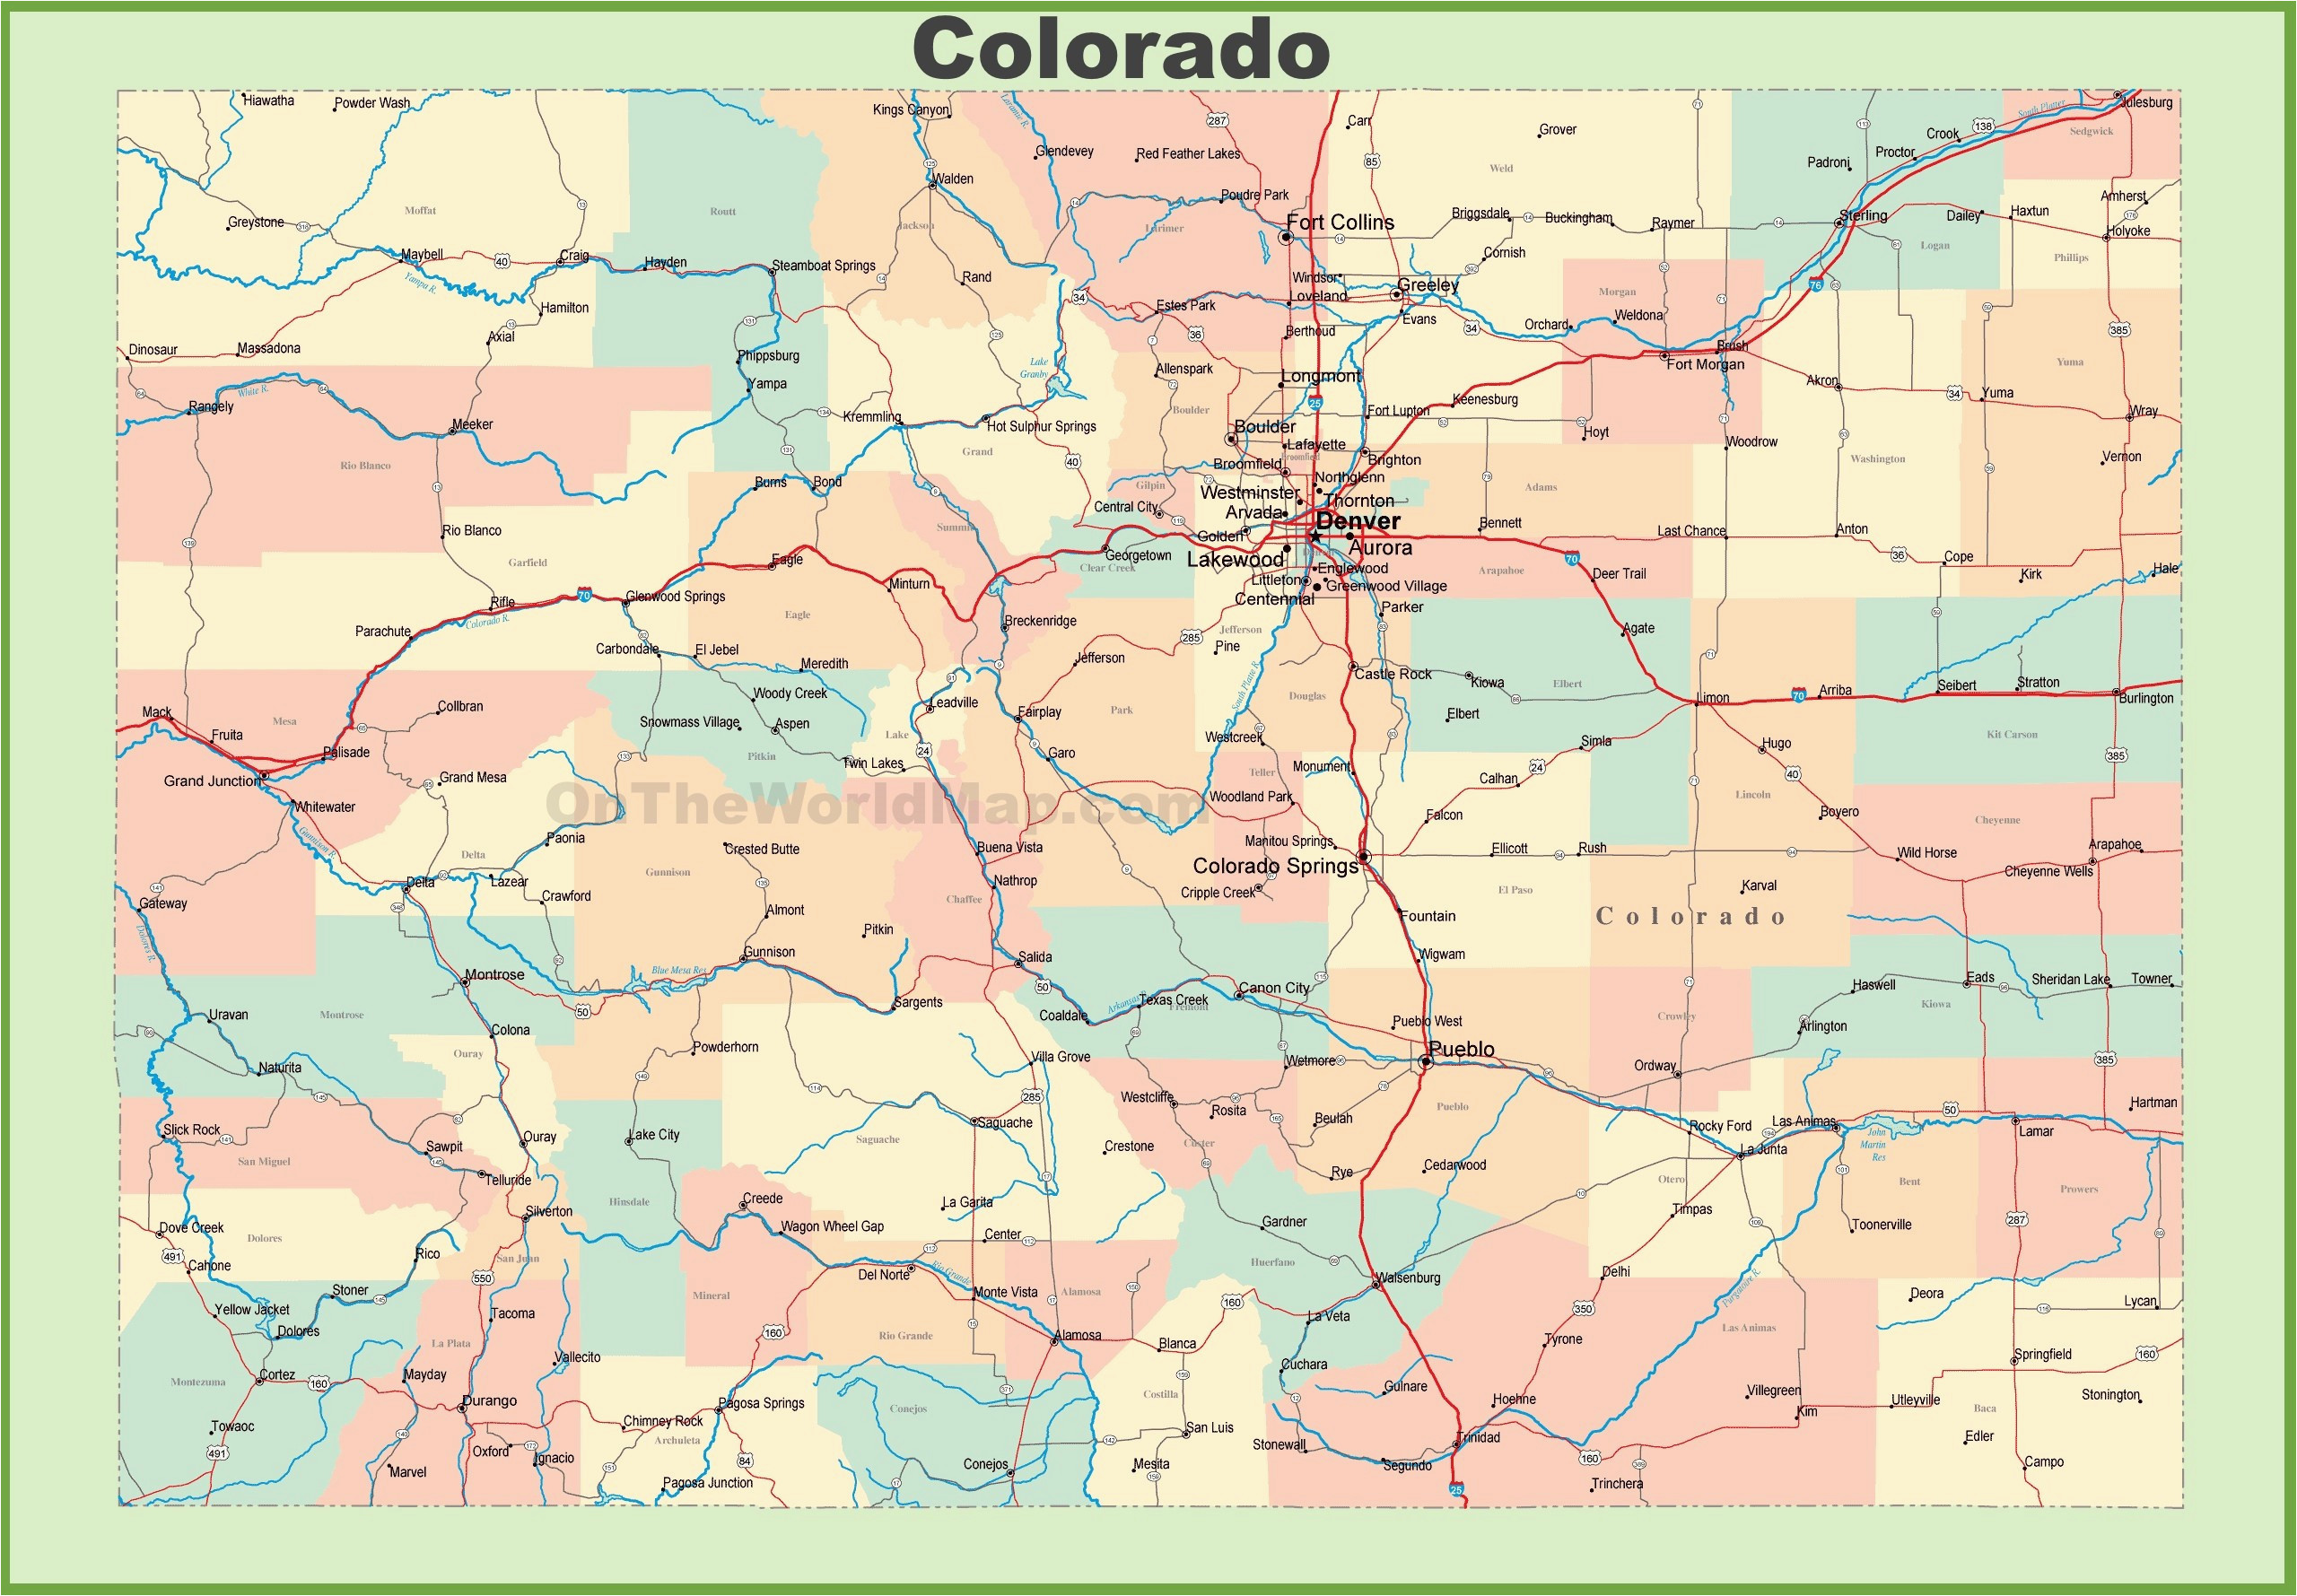 map of colorado towns awesome denver maps maps directions